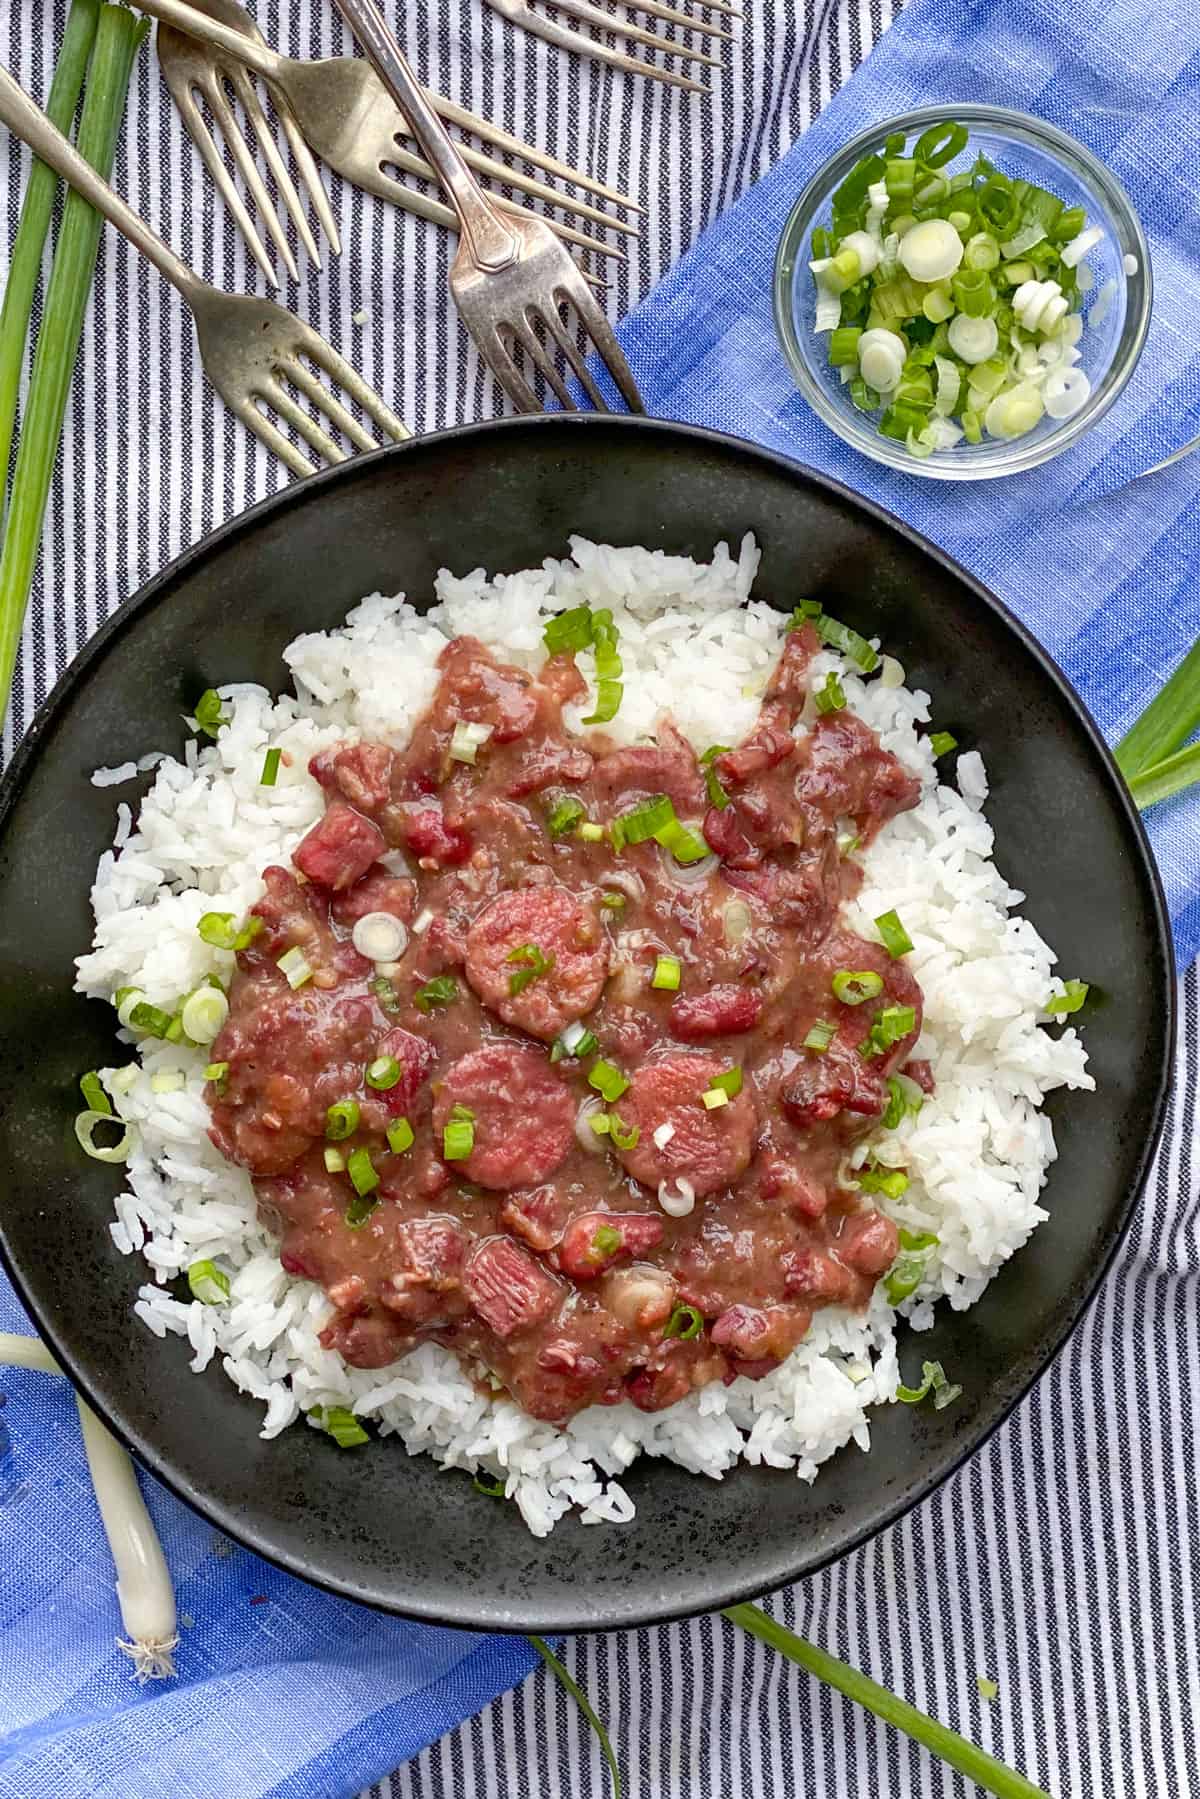 A black bowl filled with red beans and rice sprinkled with chopped scallions, 5 forks in corner pointing towards the bowl